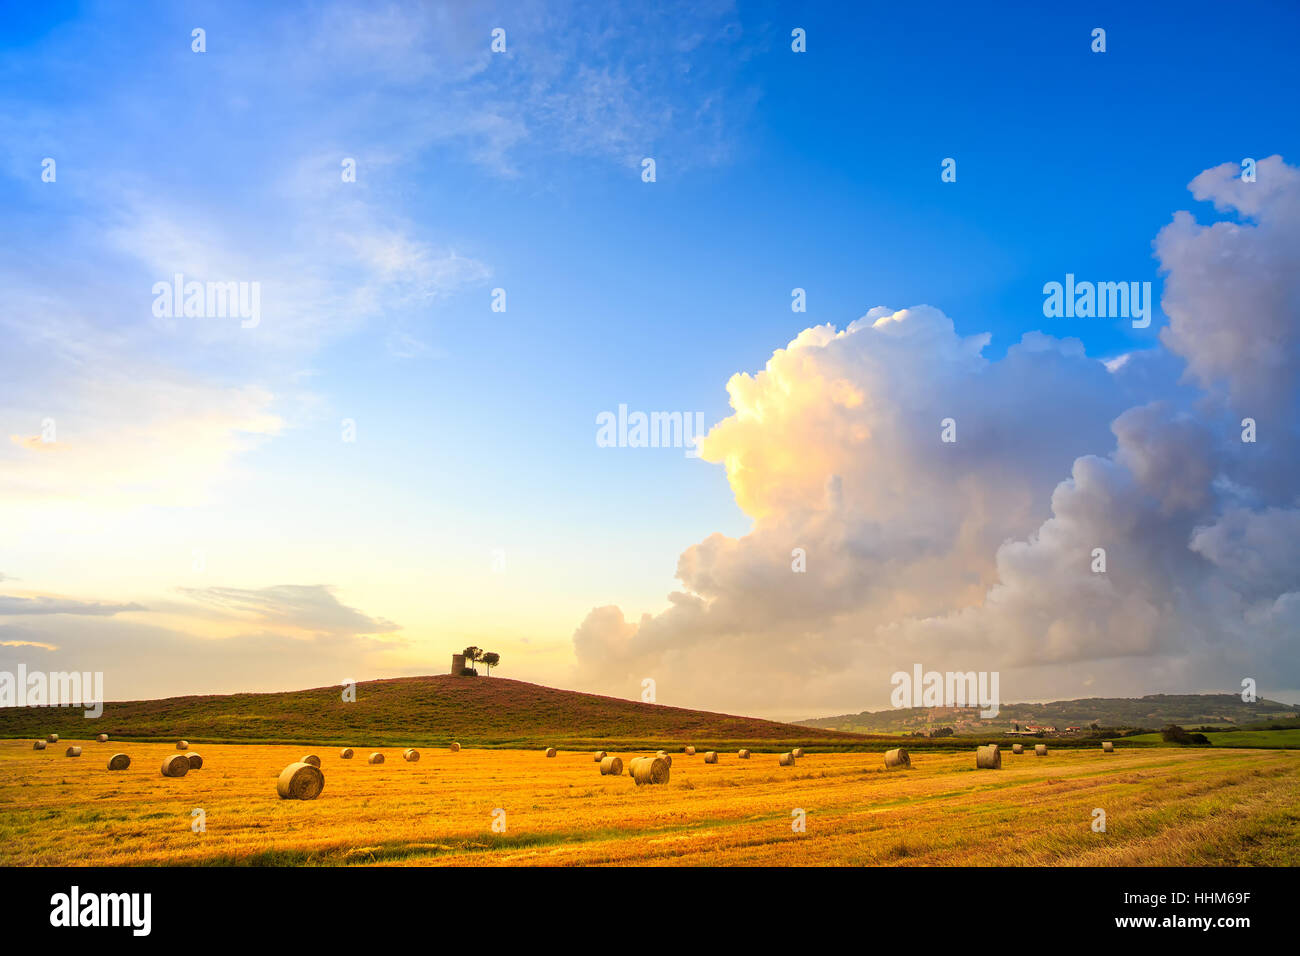 Tuscany, Maremma typical countryside sunset landscape and thunderstorm cloud. Hill, trees, straw bales and rural tower. Stock Photo